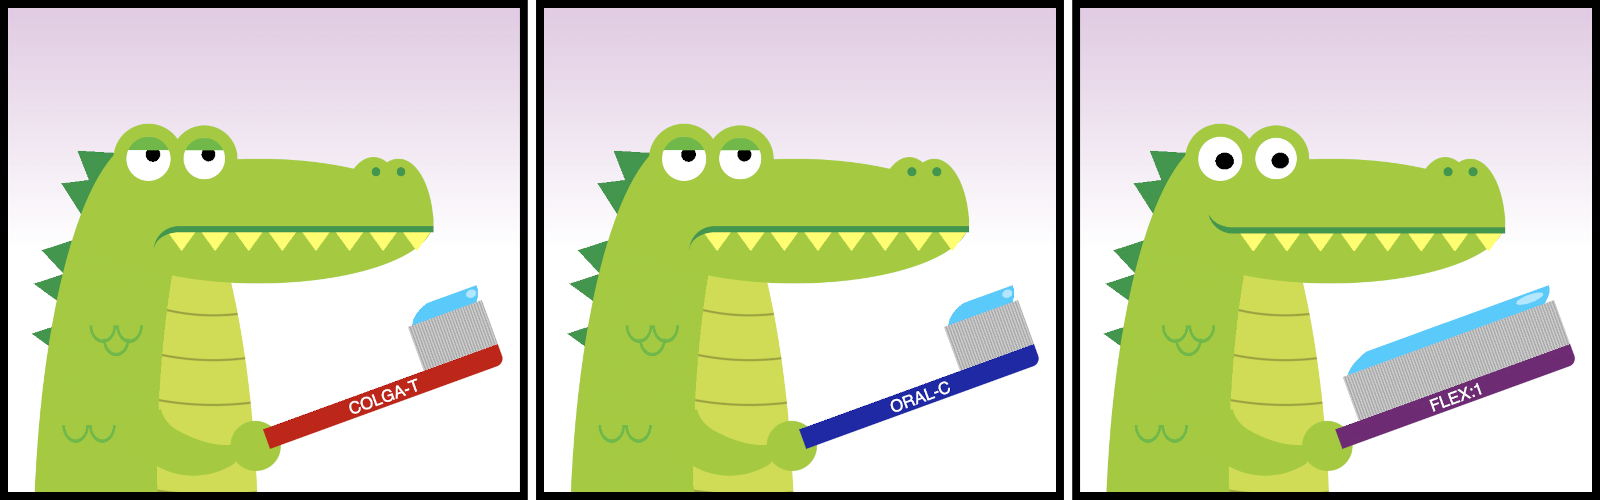 comic with three panels. In the first two an alligator looks sad while holding a tootbrush with a regular-size brush branded Colga-T (panel 1) and Oral-C (panel 2). In the third panel, the alligator is happy, holding a toothbrush with an oversized brush. The toothbrush brand is flex:1.